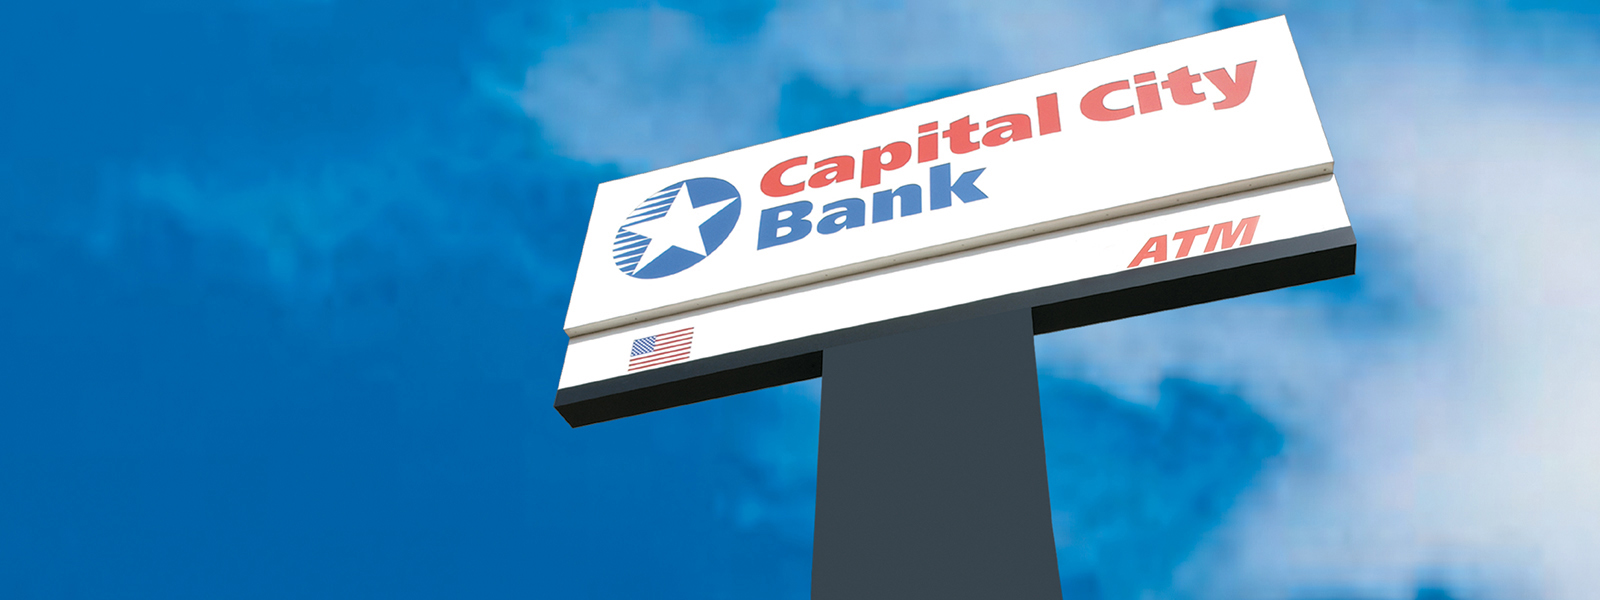 Find answers to common questions at Capital City Bank